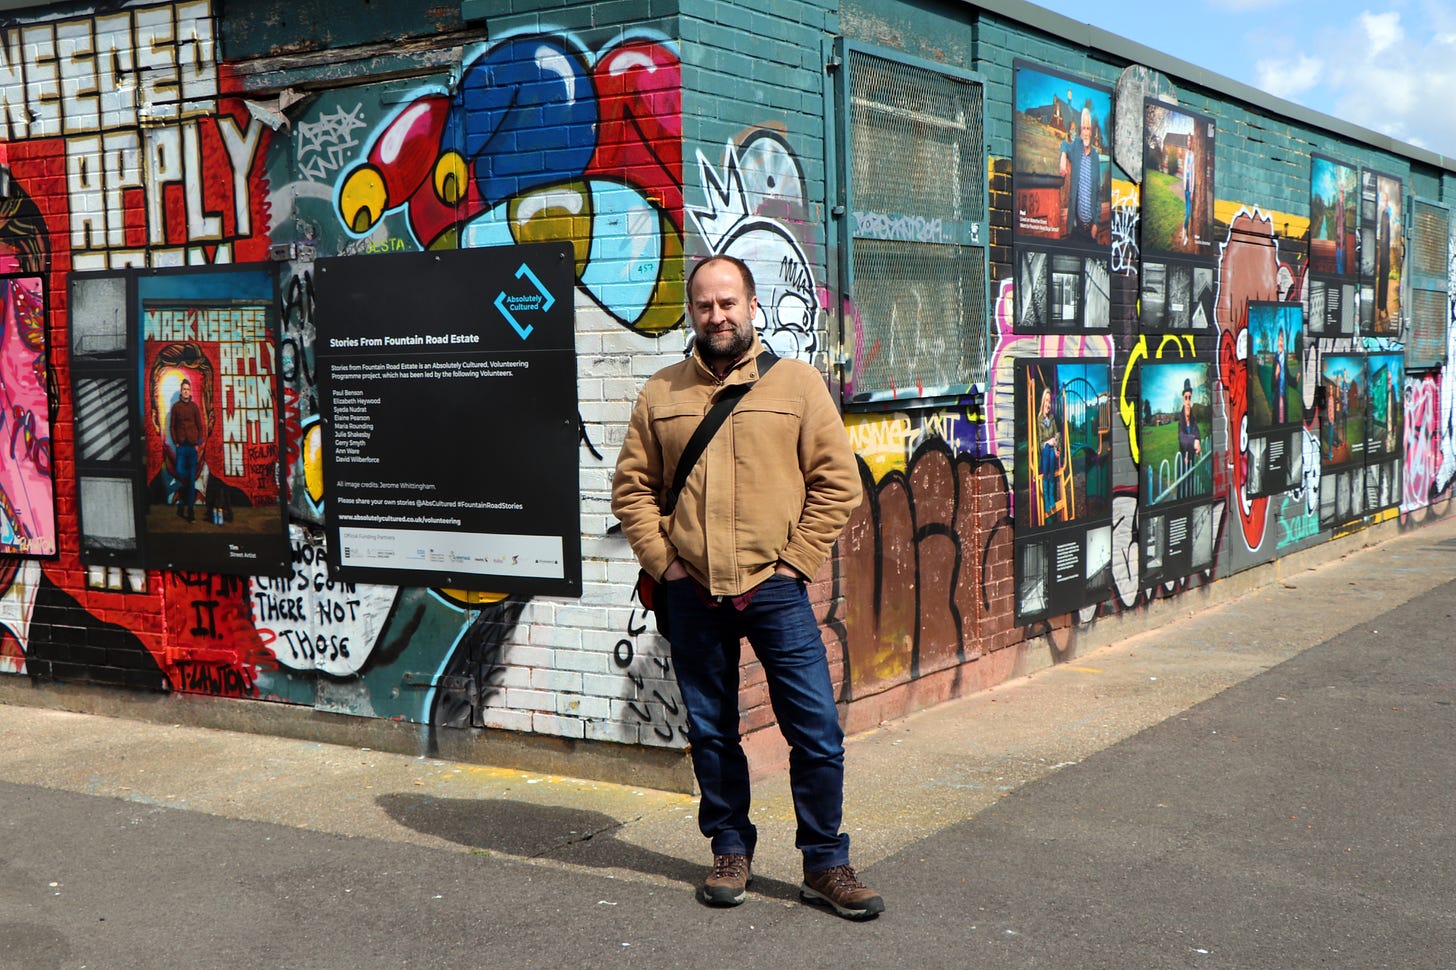 Stories from Fountain Road Estate, Hull, exhibition by Jerome Whittingham